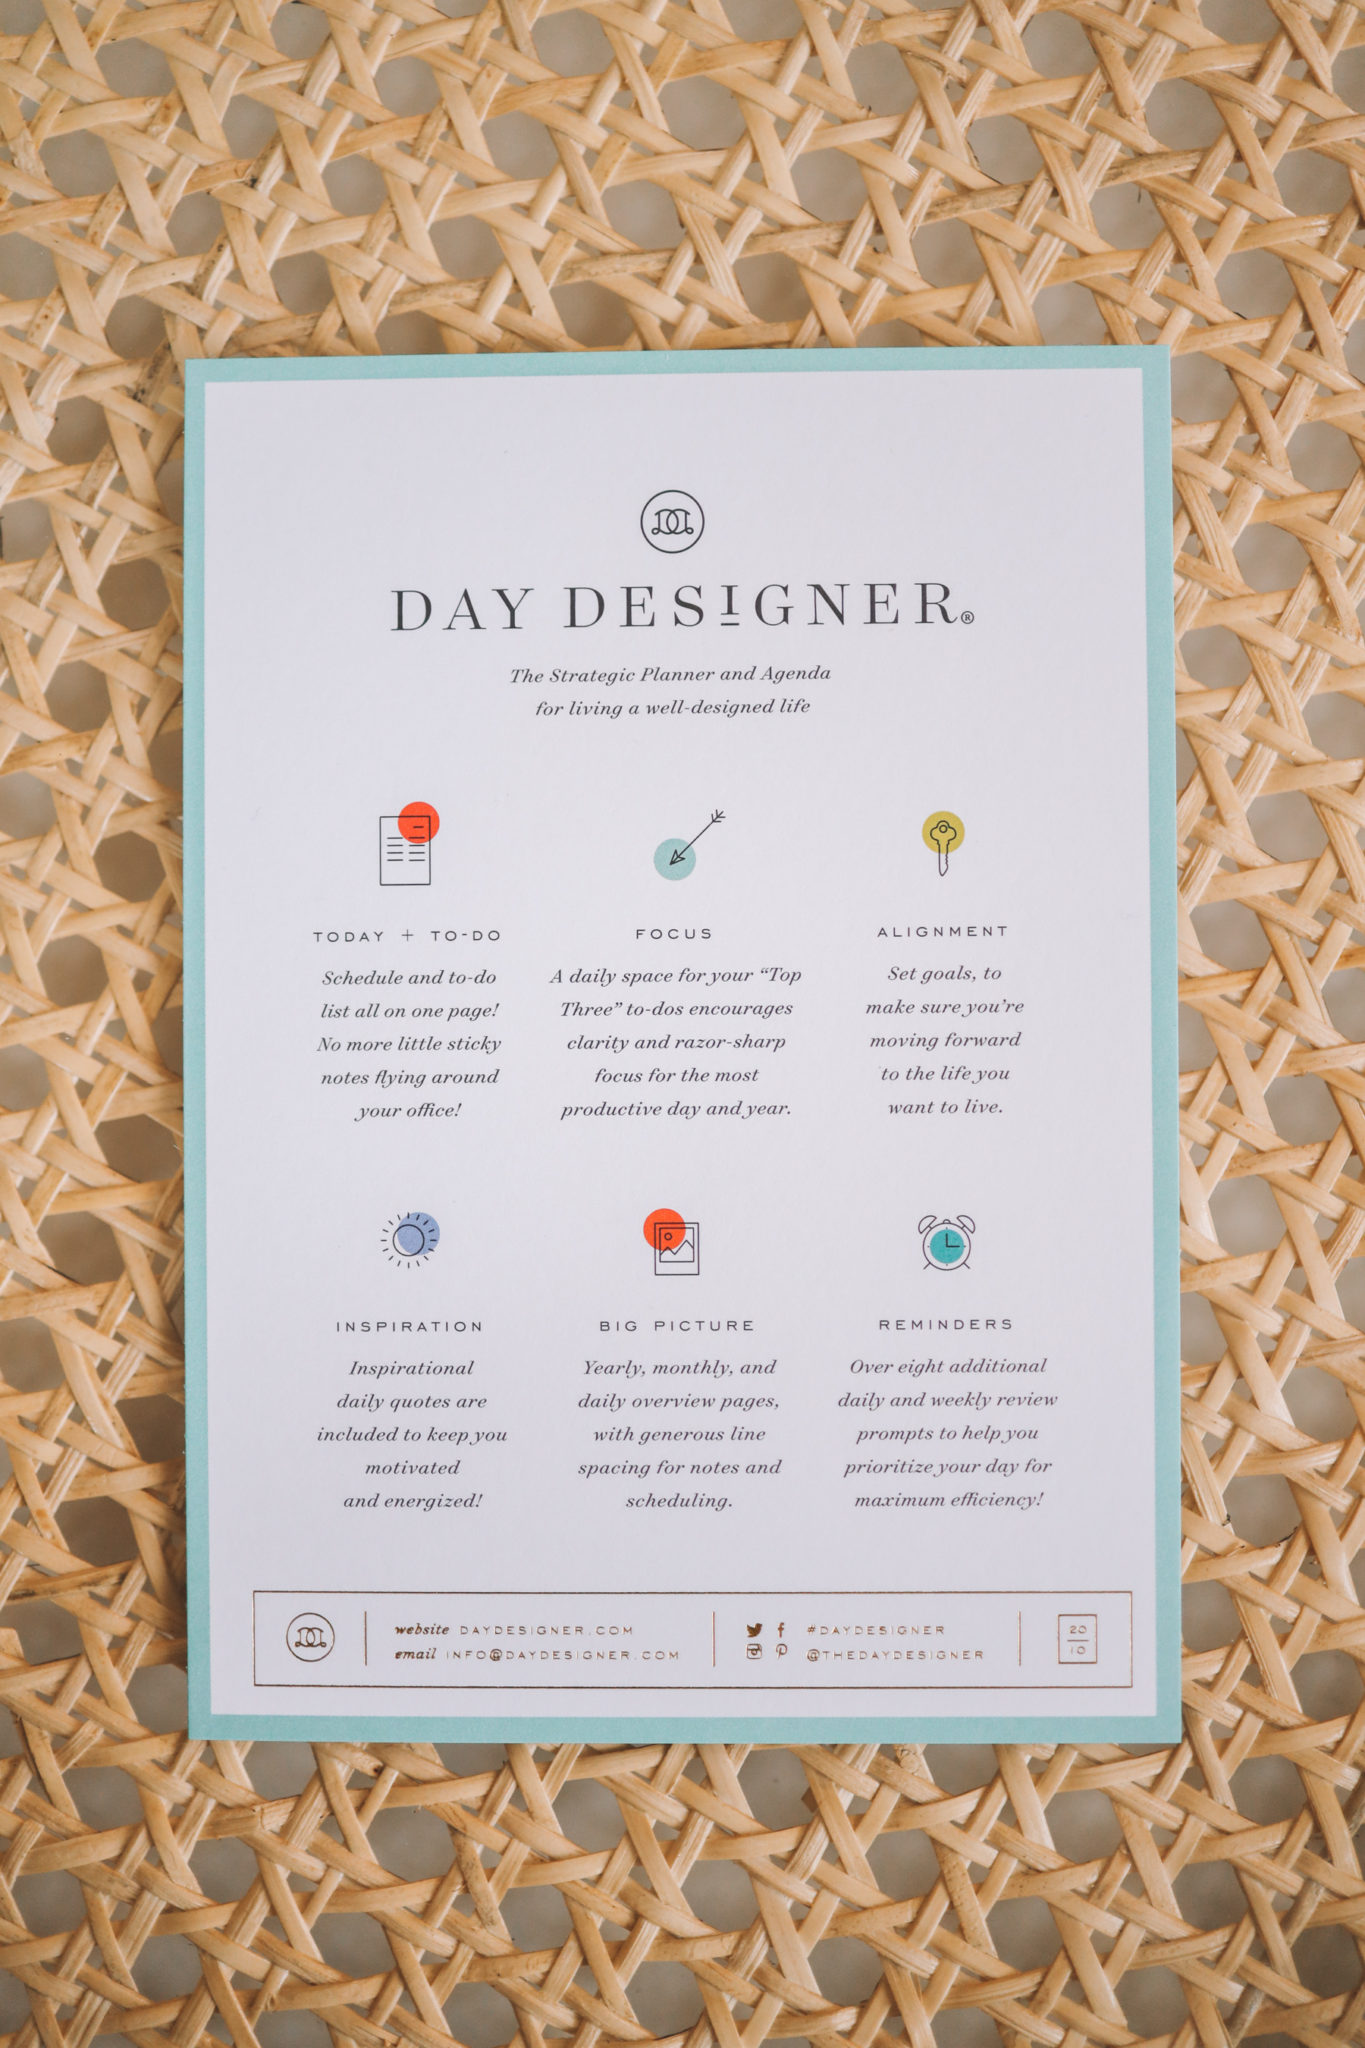 Day Designer Review Kelly in the City Lifestyle Blog